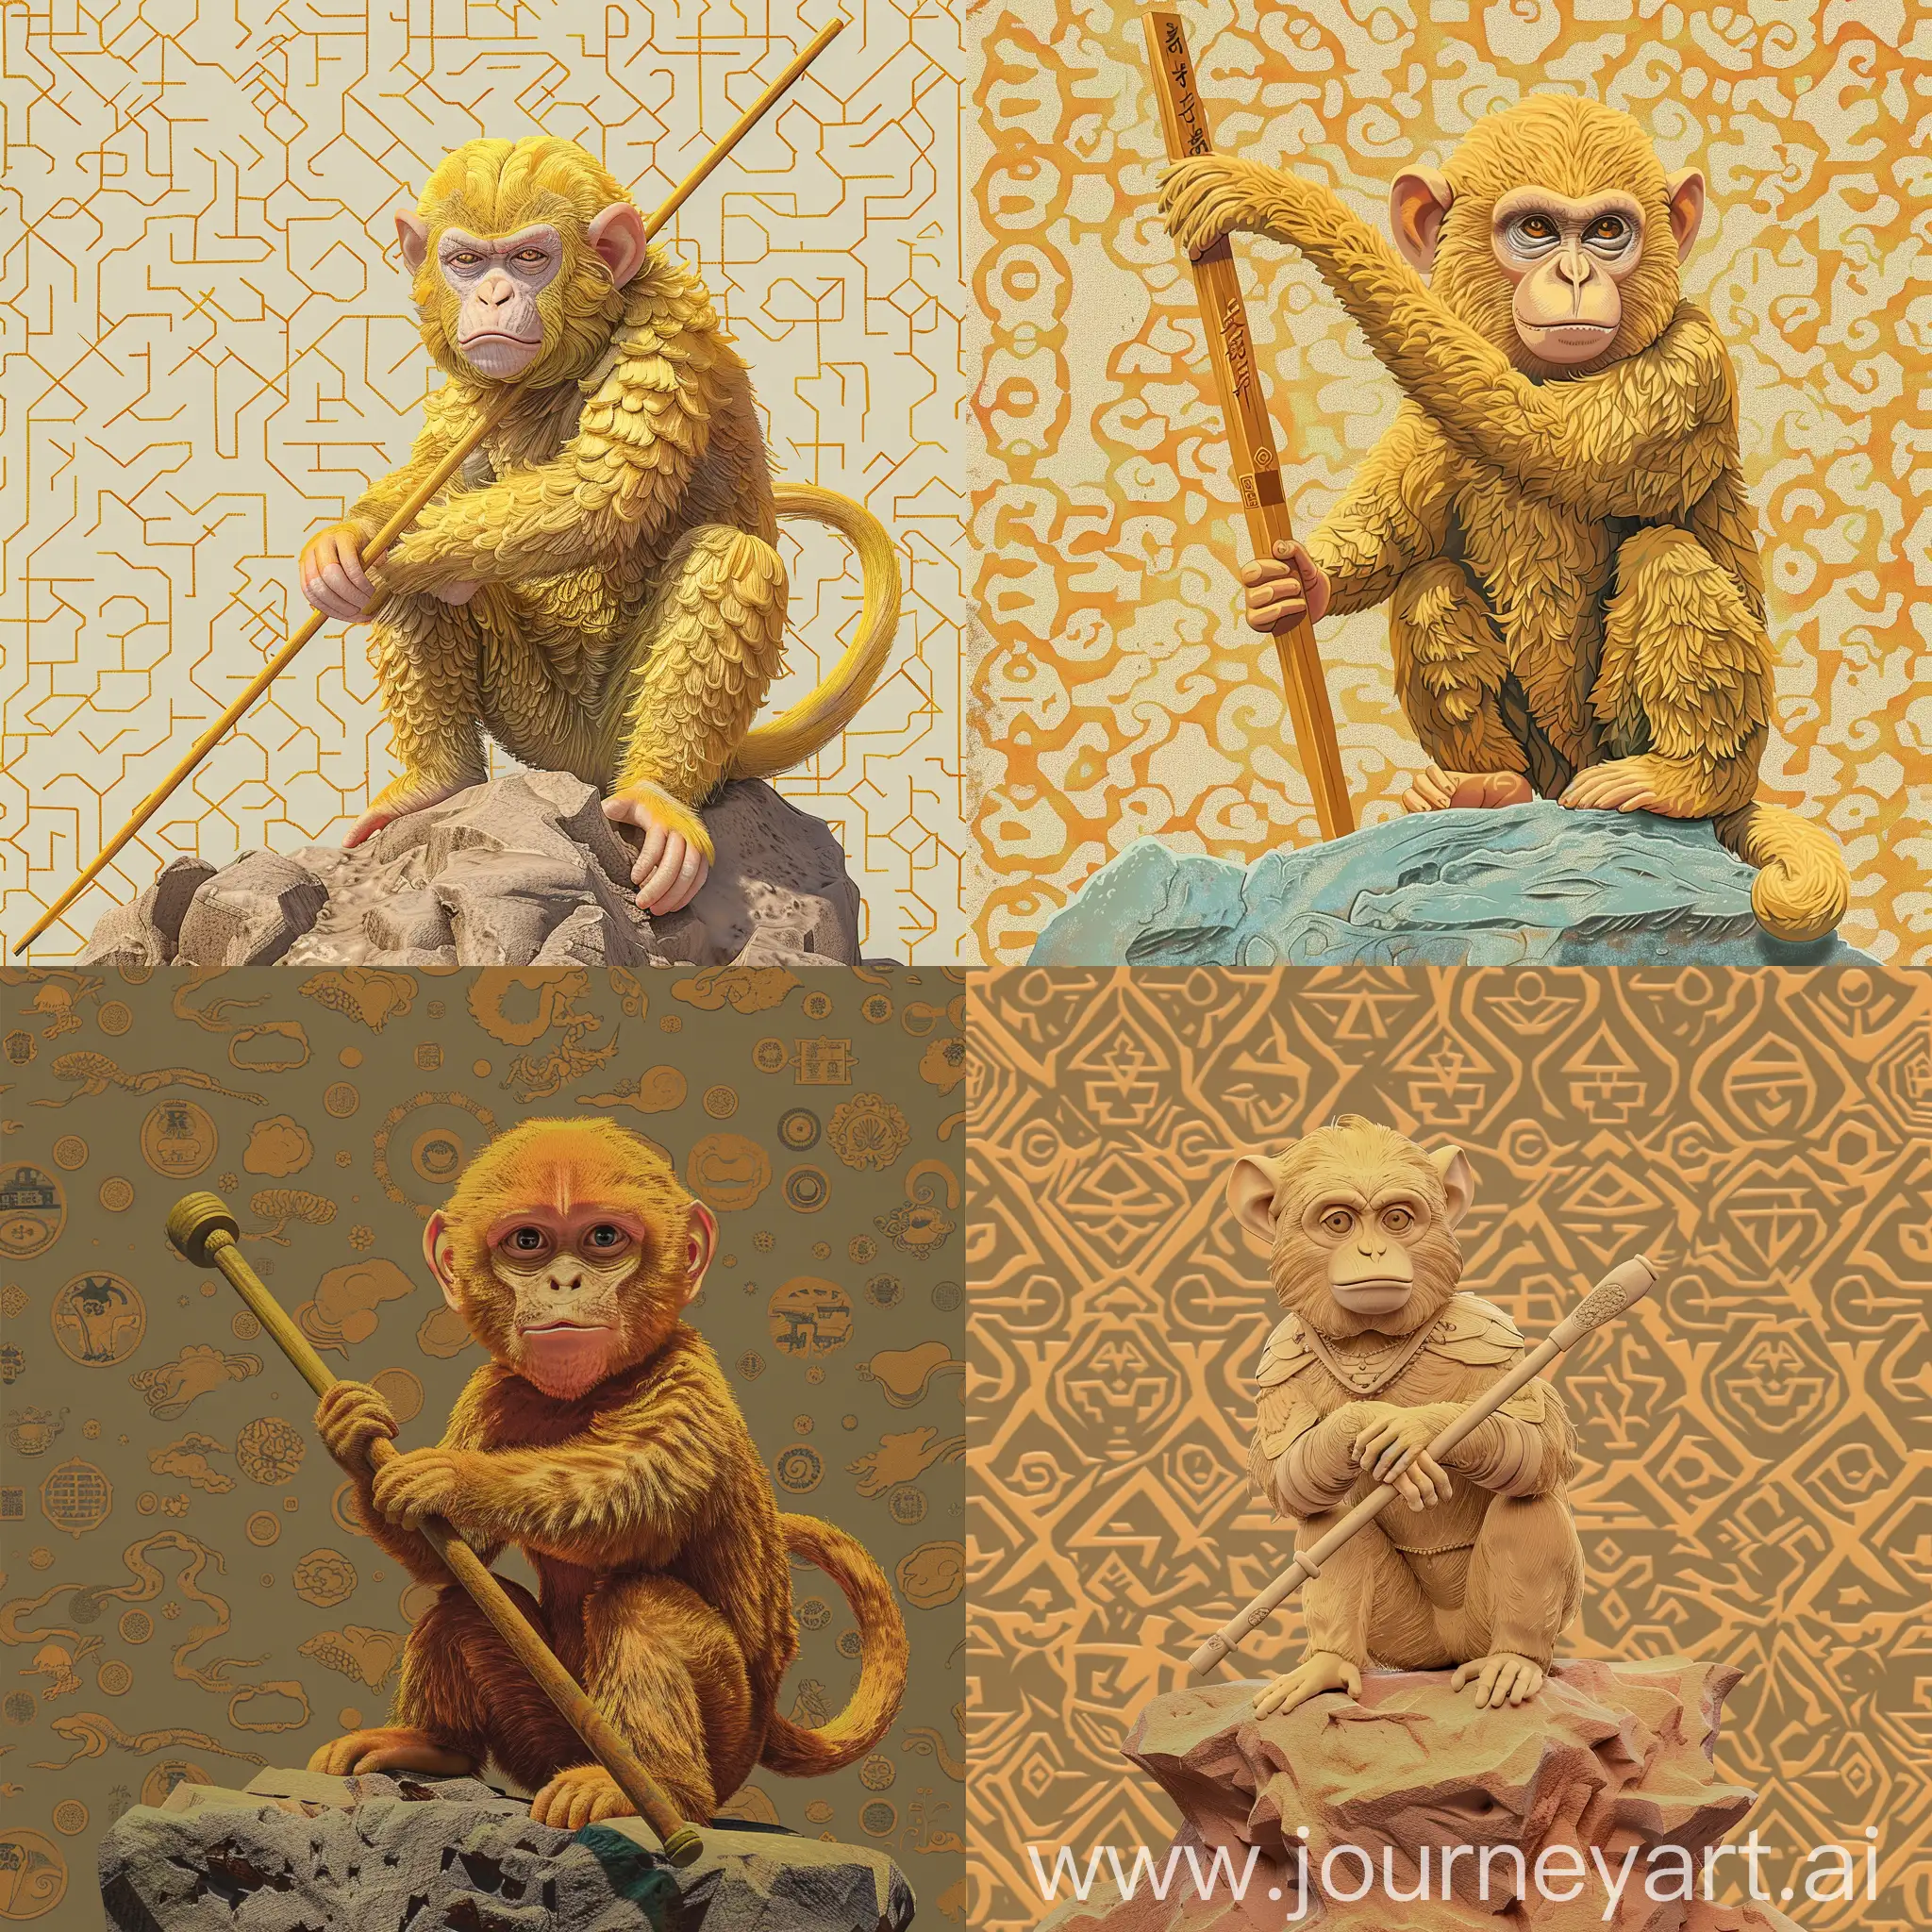 pastel Color,Pastel painting,cool,best quality,ultra detailed,pop,woodcut,24k,panorama,furry,Anthro,Golden snub-nosed monkey sitting on a rock wielding a long stick, Features: (The face of Peking opera, dignified ), Chinese Pattern Background,in Kōhei Horikoshi style, Chinese ink painting,Solid pastel background, anime style, flat style,Bold outline;; monkey face